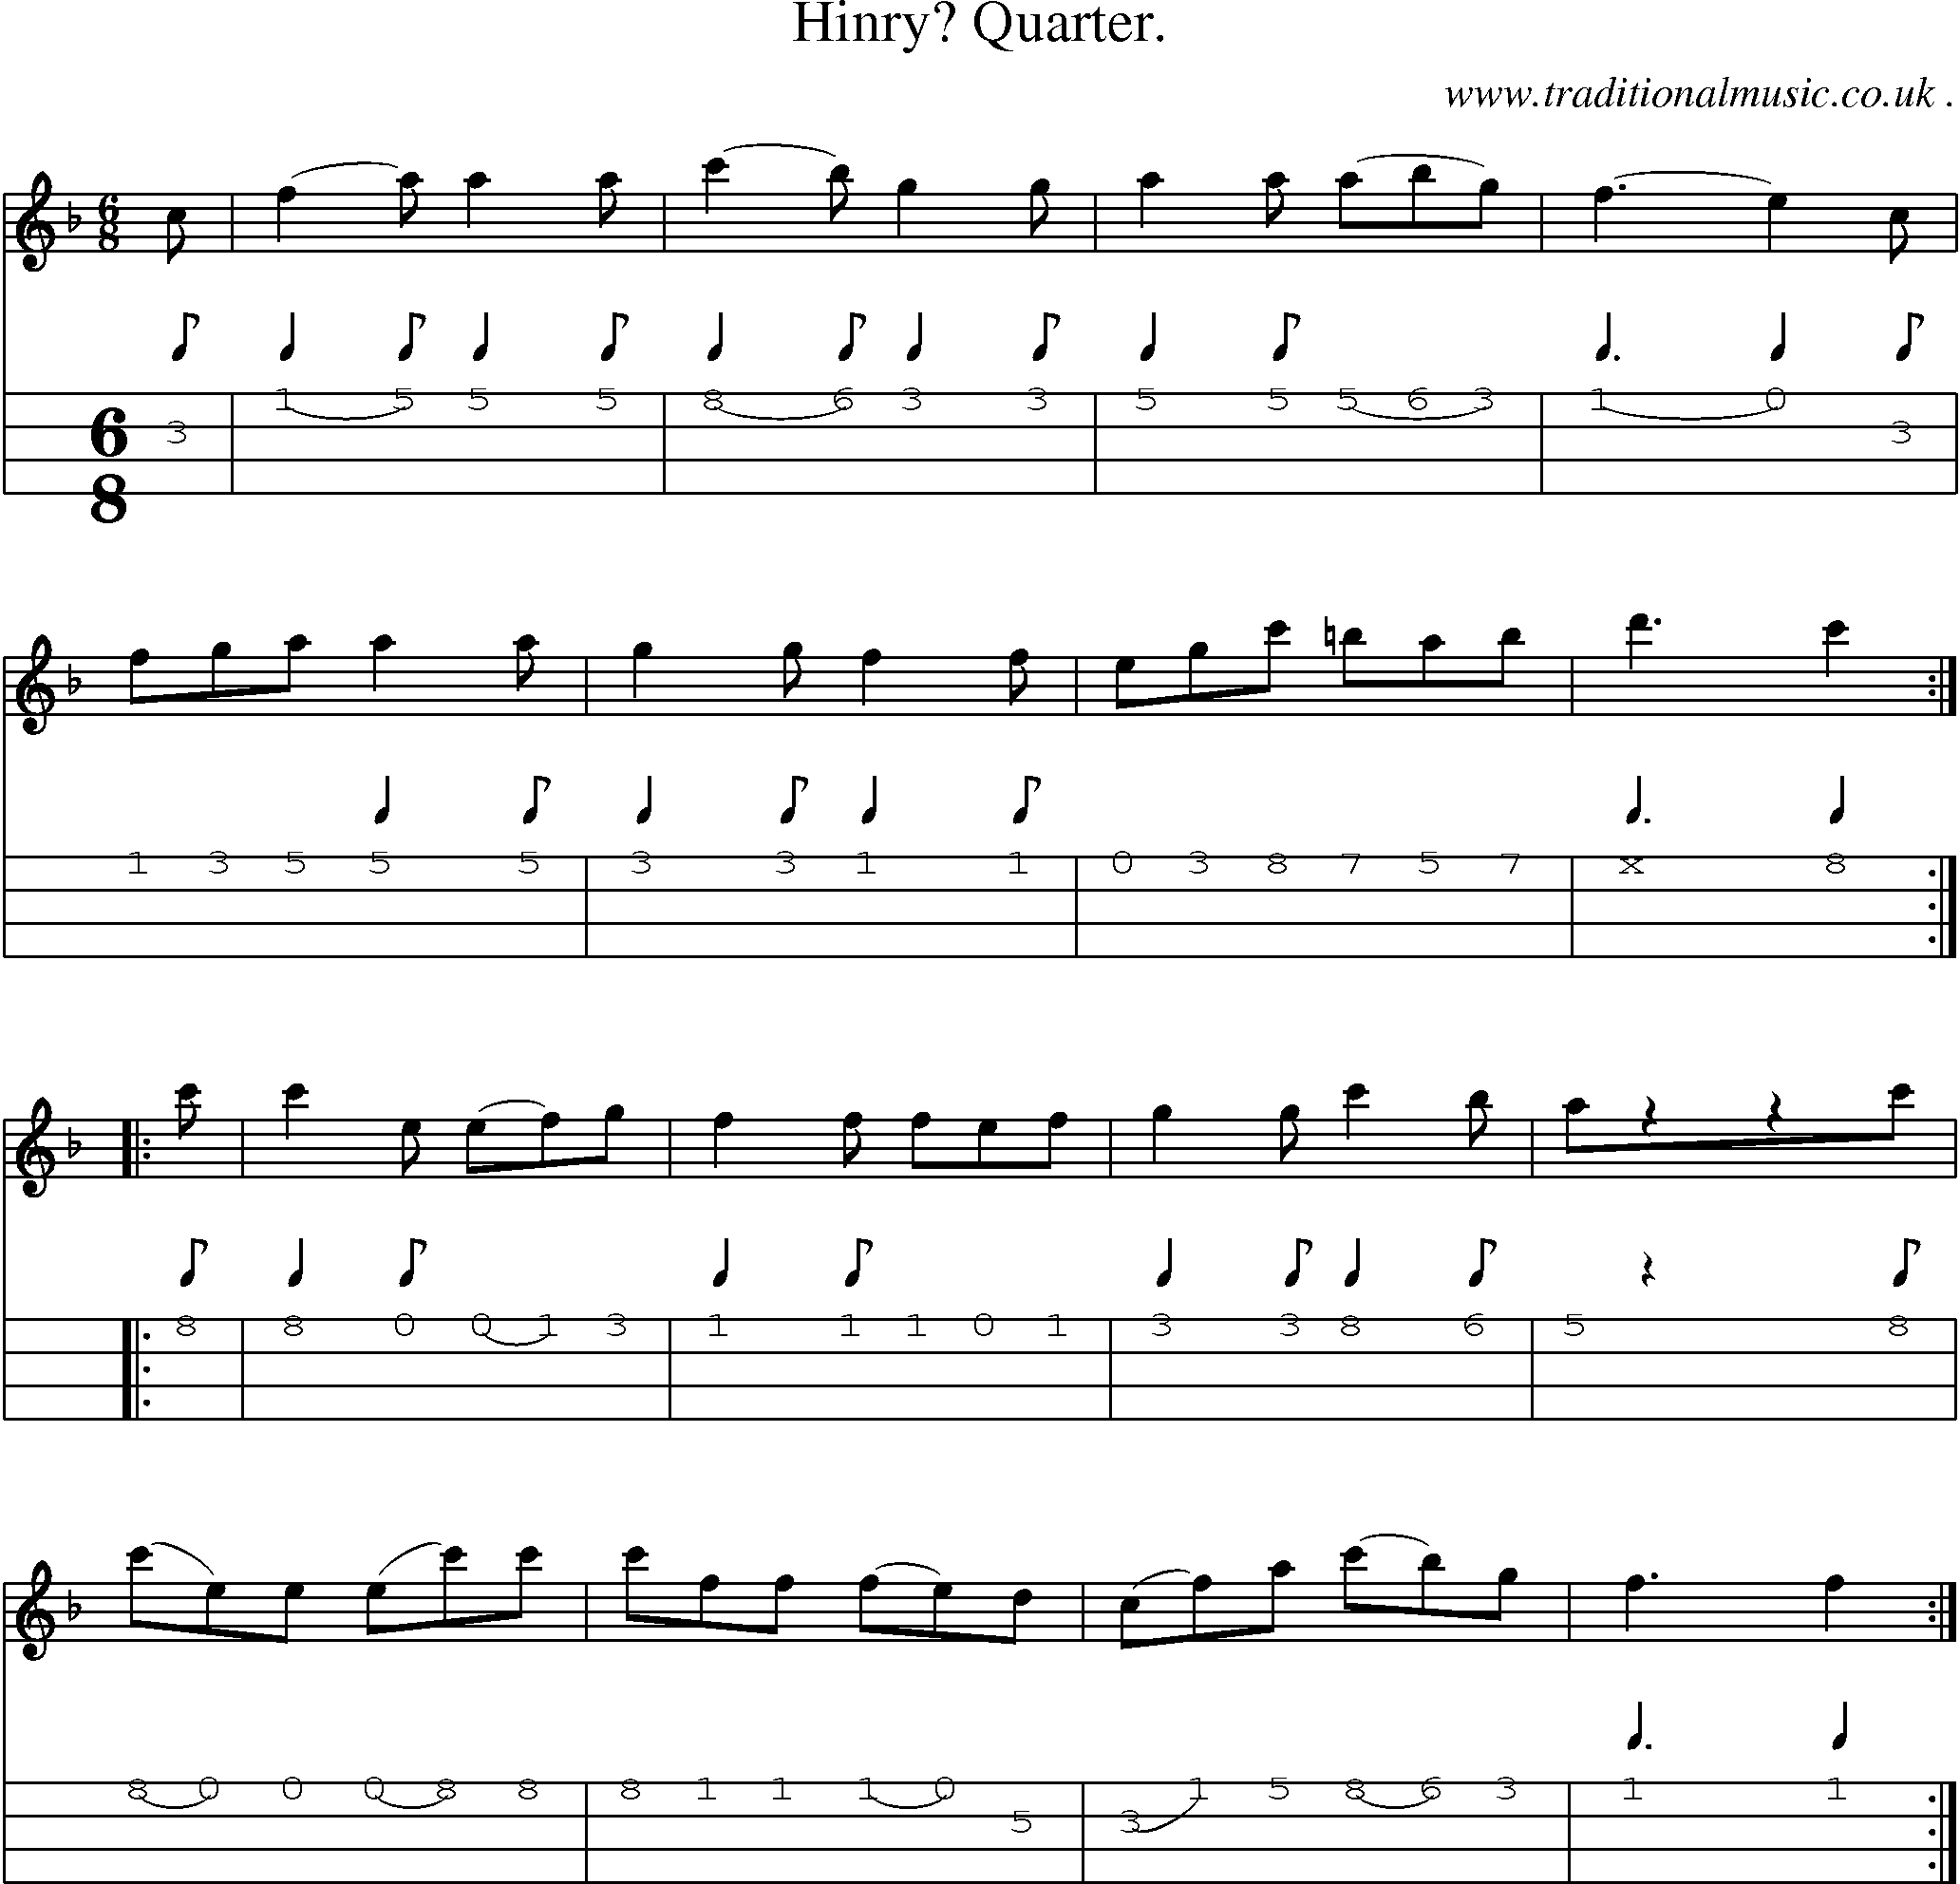 Sheet-Music and Mandolin Tabs for Hinry Quarter